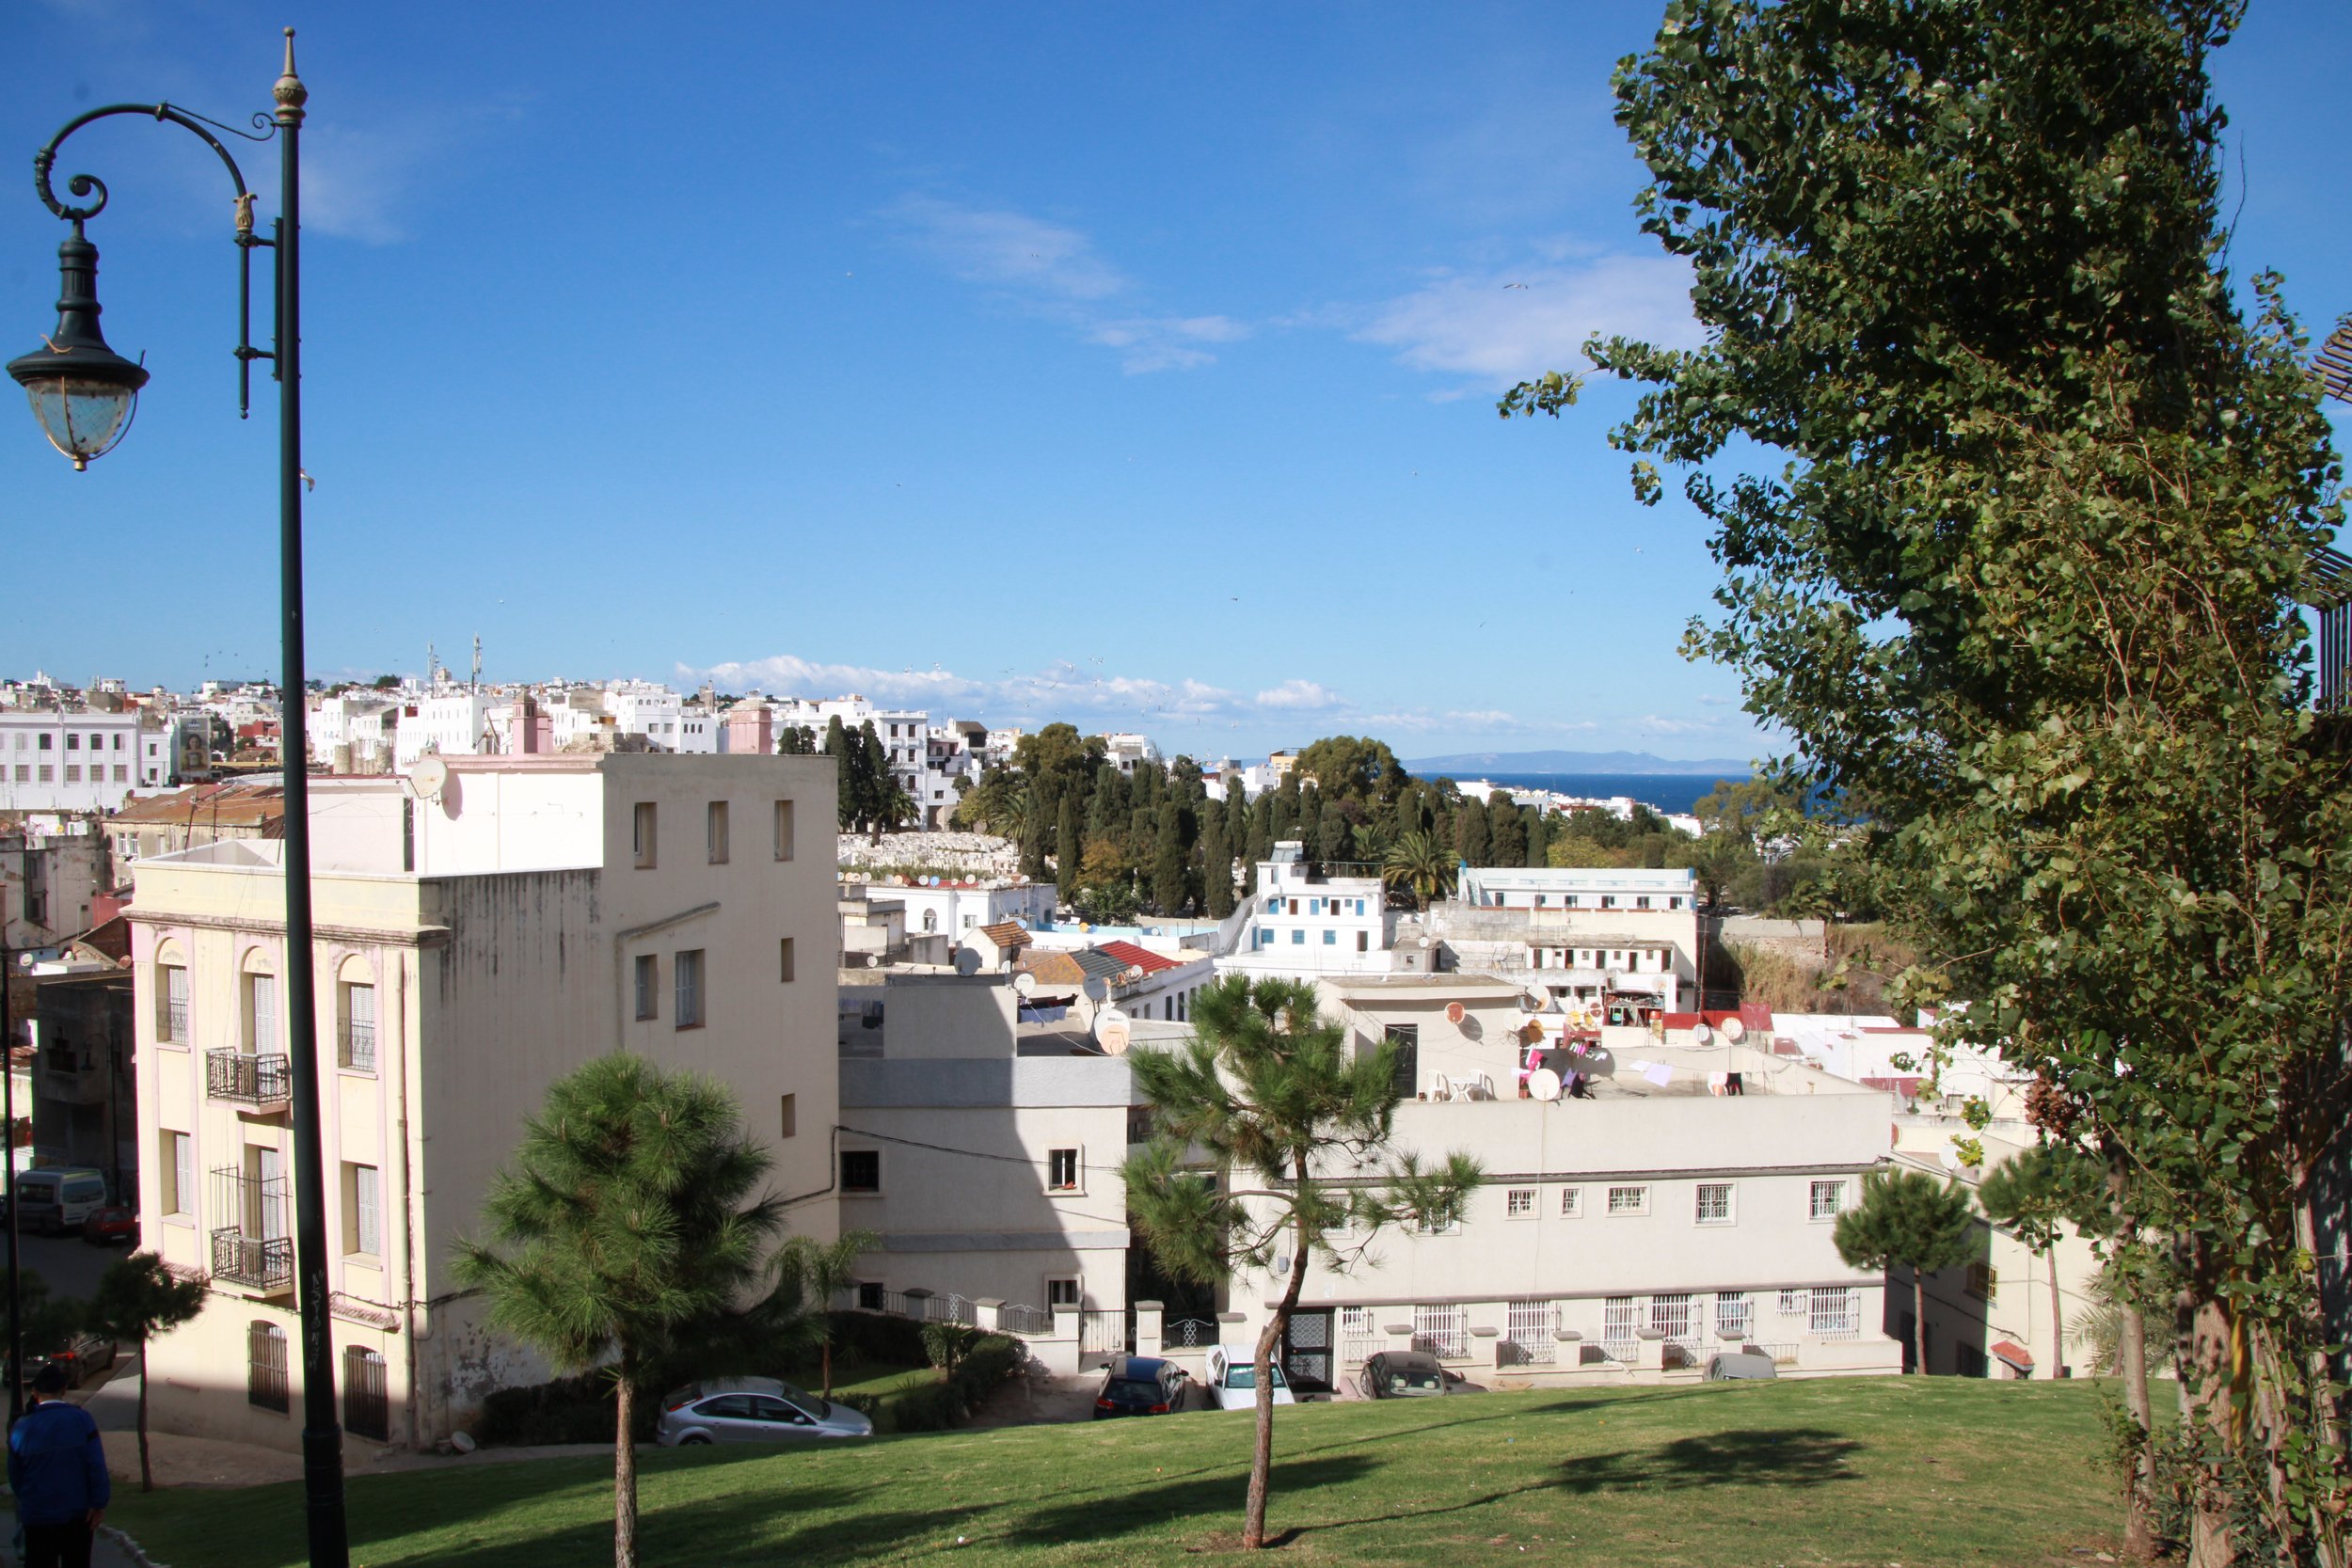  TANGIER, Morocco. November 7th, 2021. PICTURED: The city seen from a green area near to the Grand Cafe de Paris. PC: Andrew Corbley © 